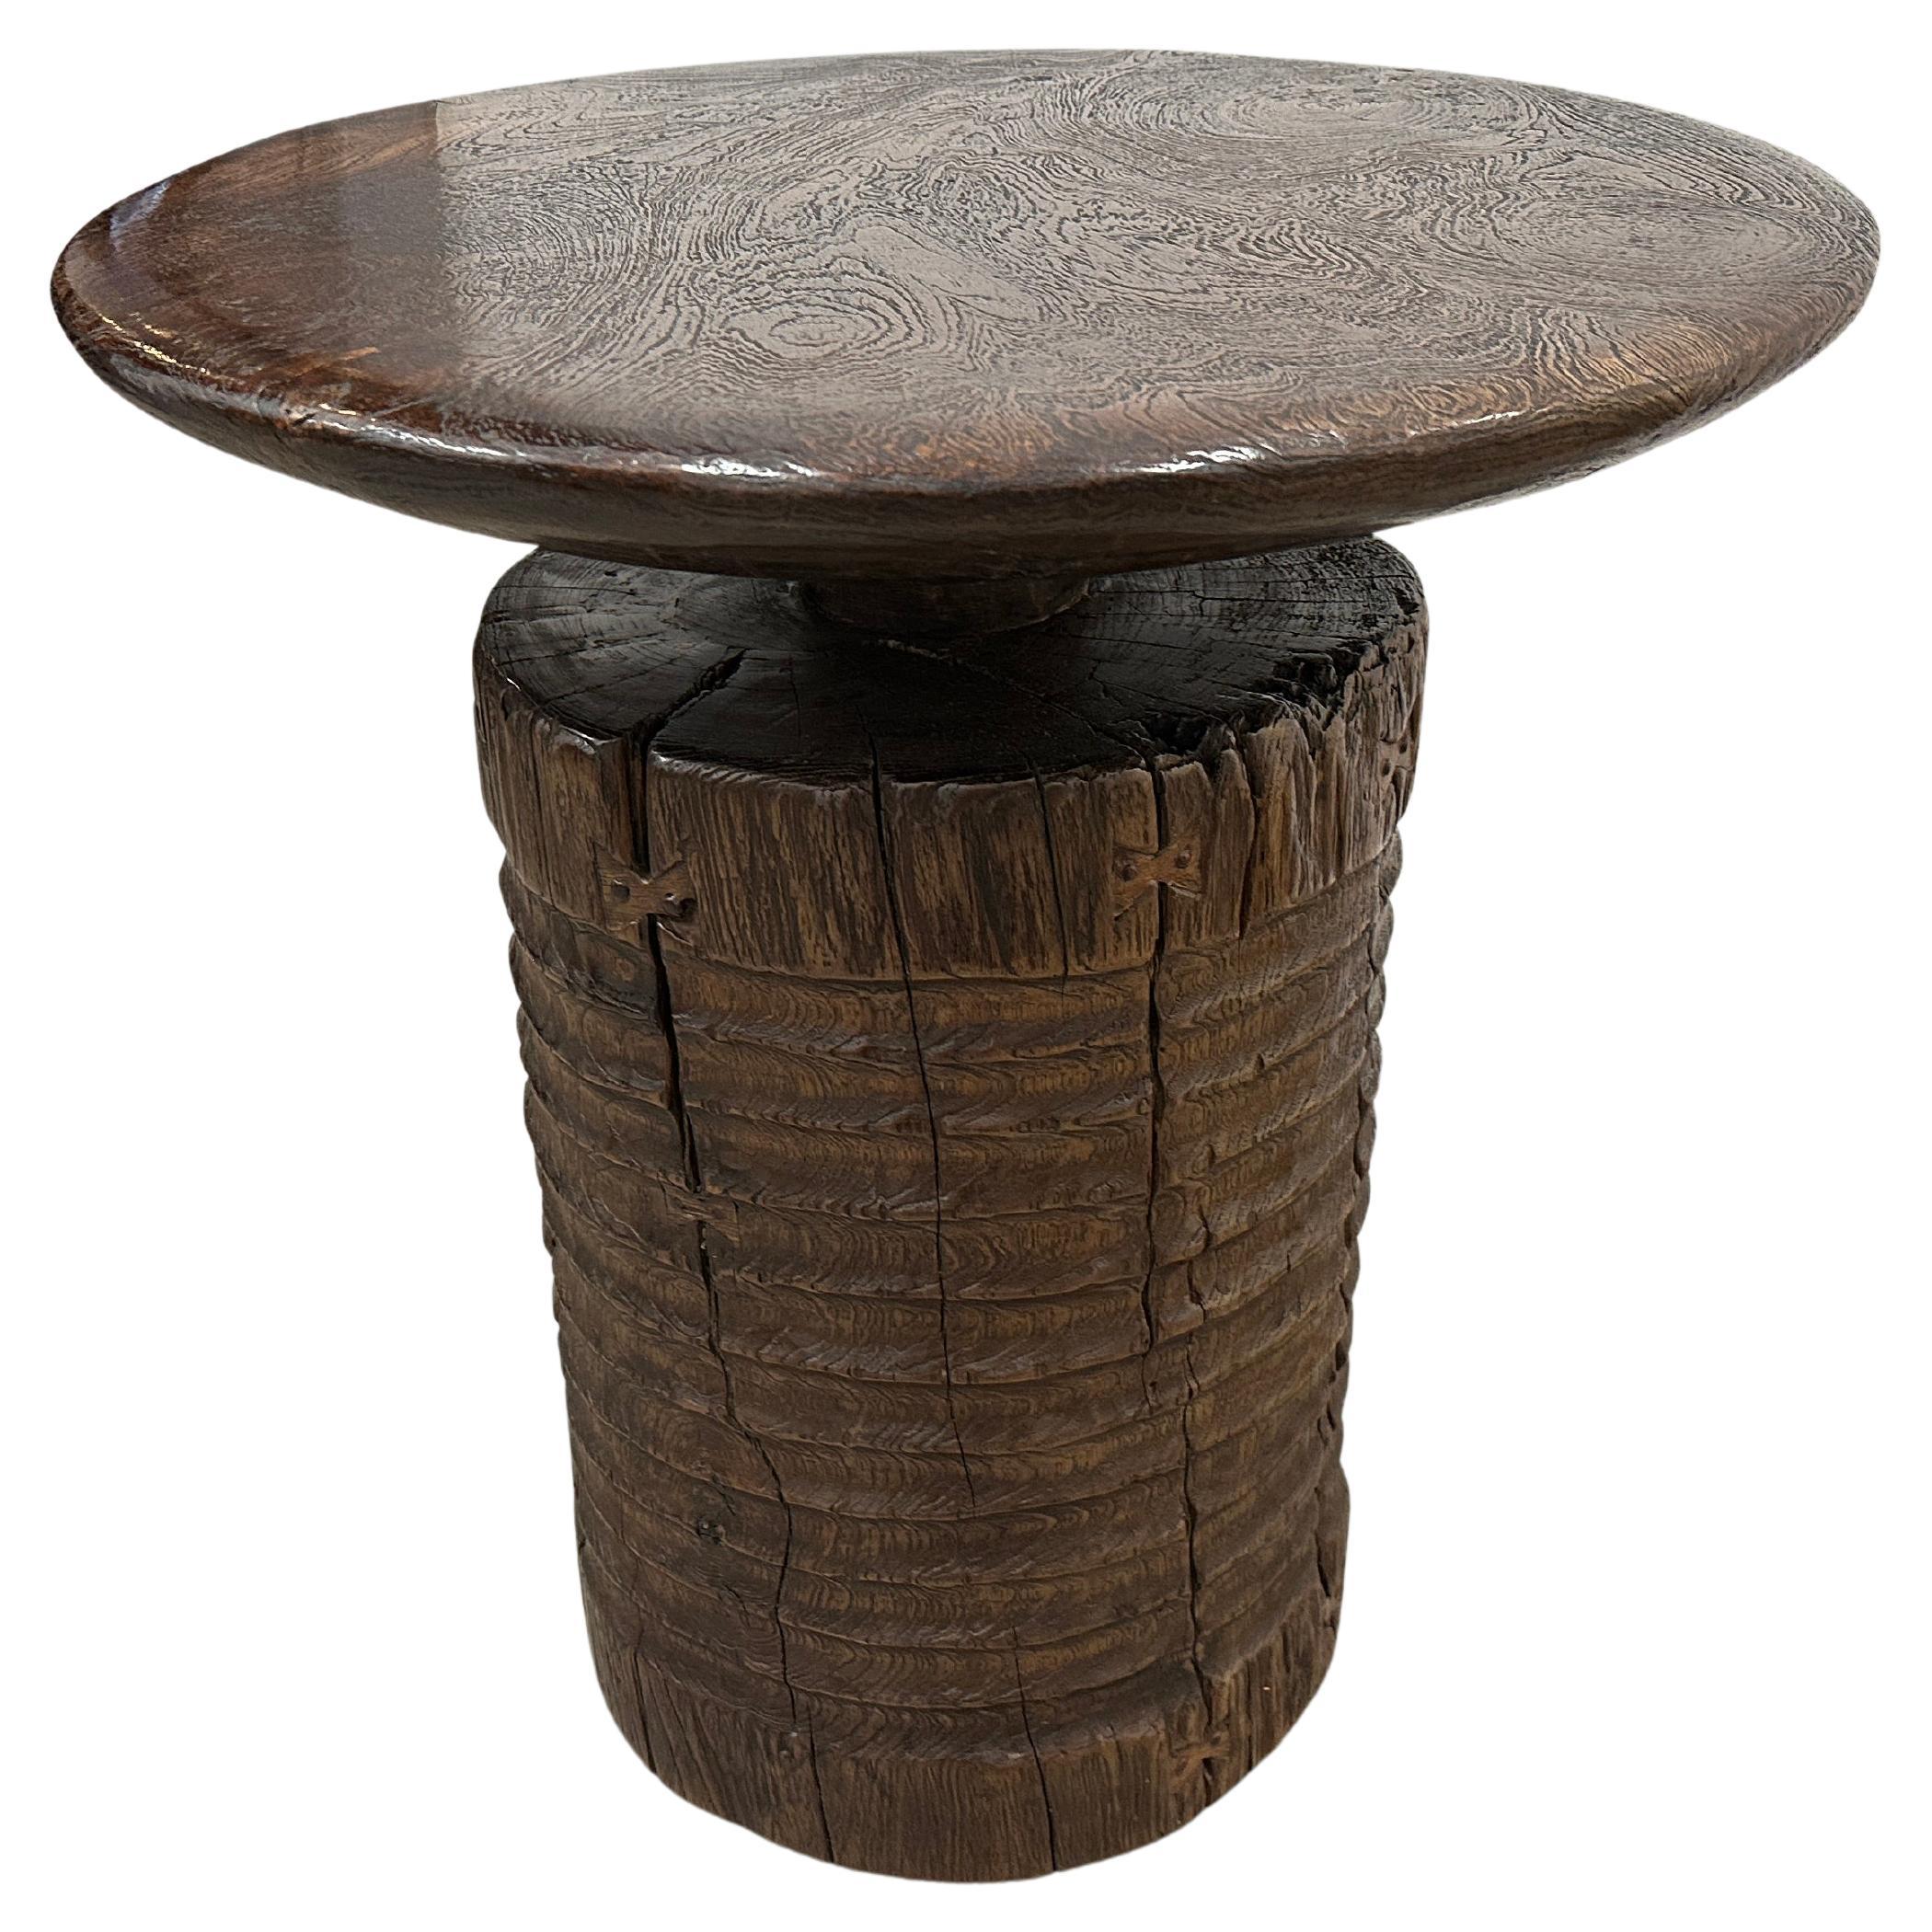 Andrianna Shamaris Impressive Century Old Teak Wood Side Table or Entry Table For Sale